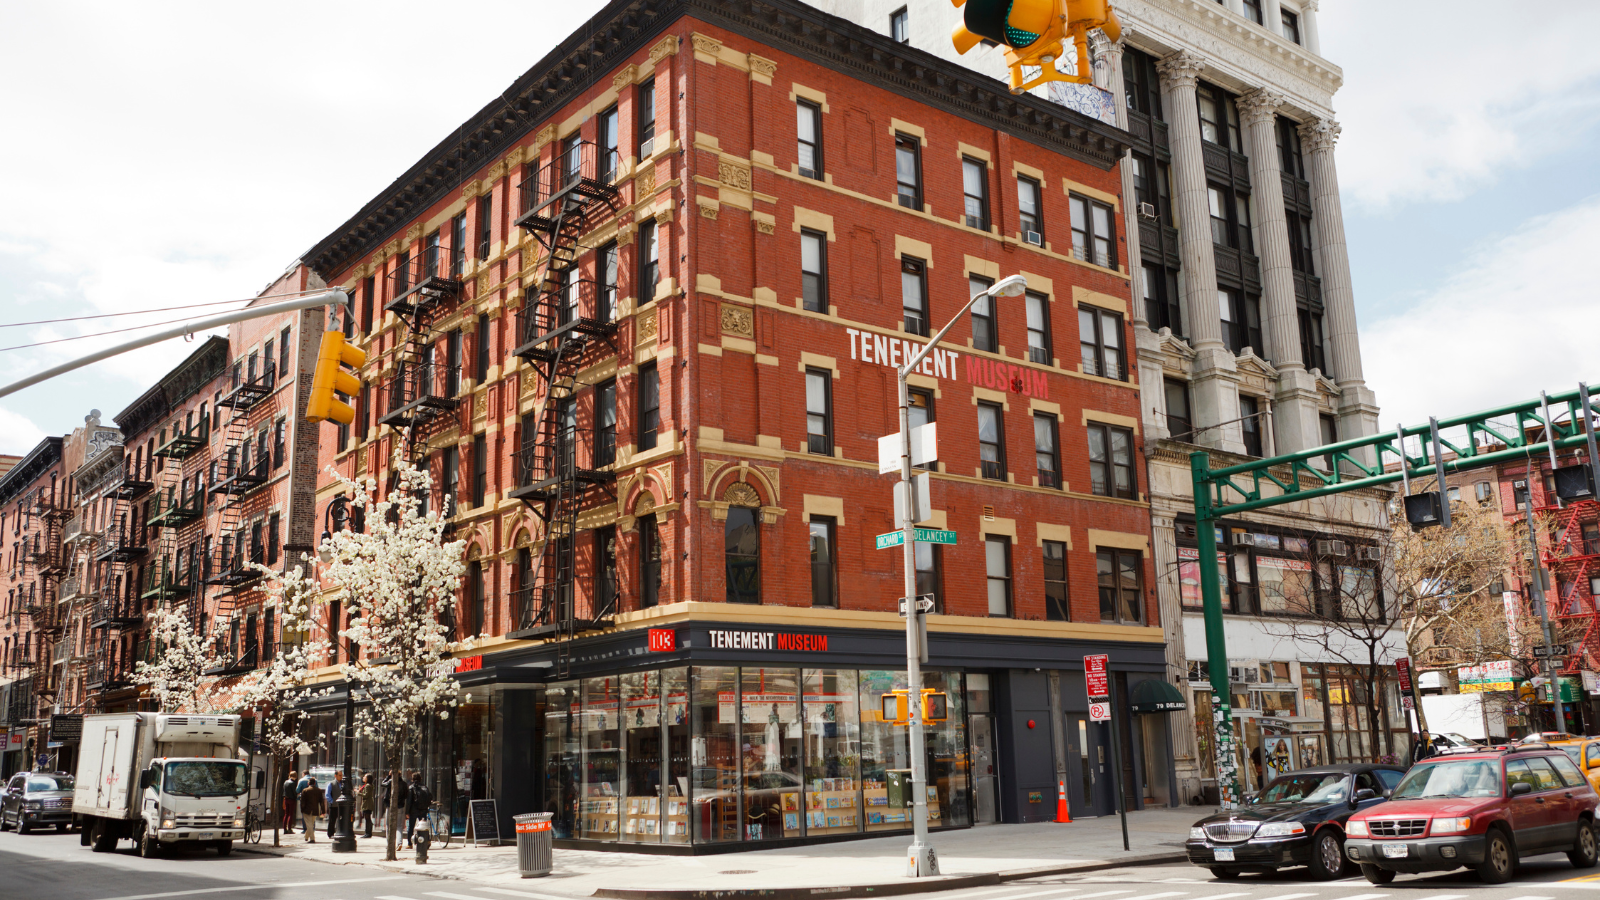 Explore New York City's history at the Tenement Museum.